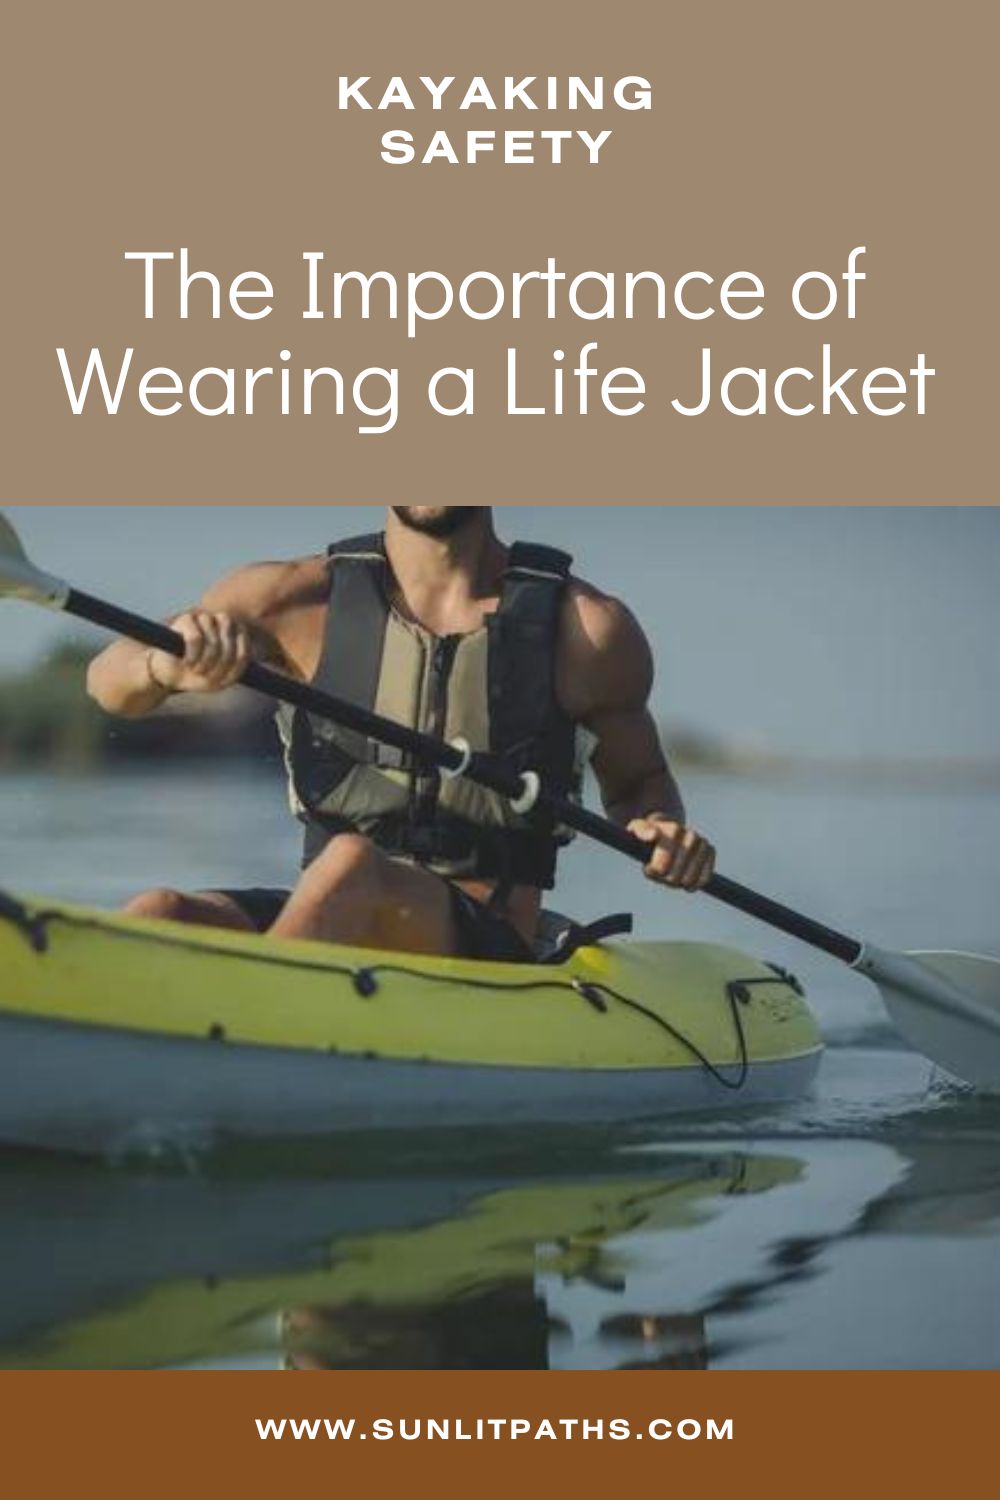 The Importance of Wearing a Life Jacket